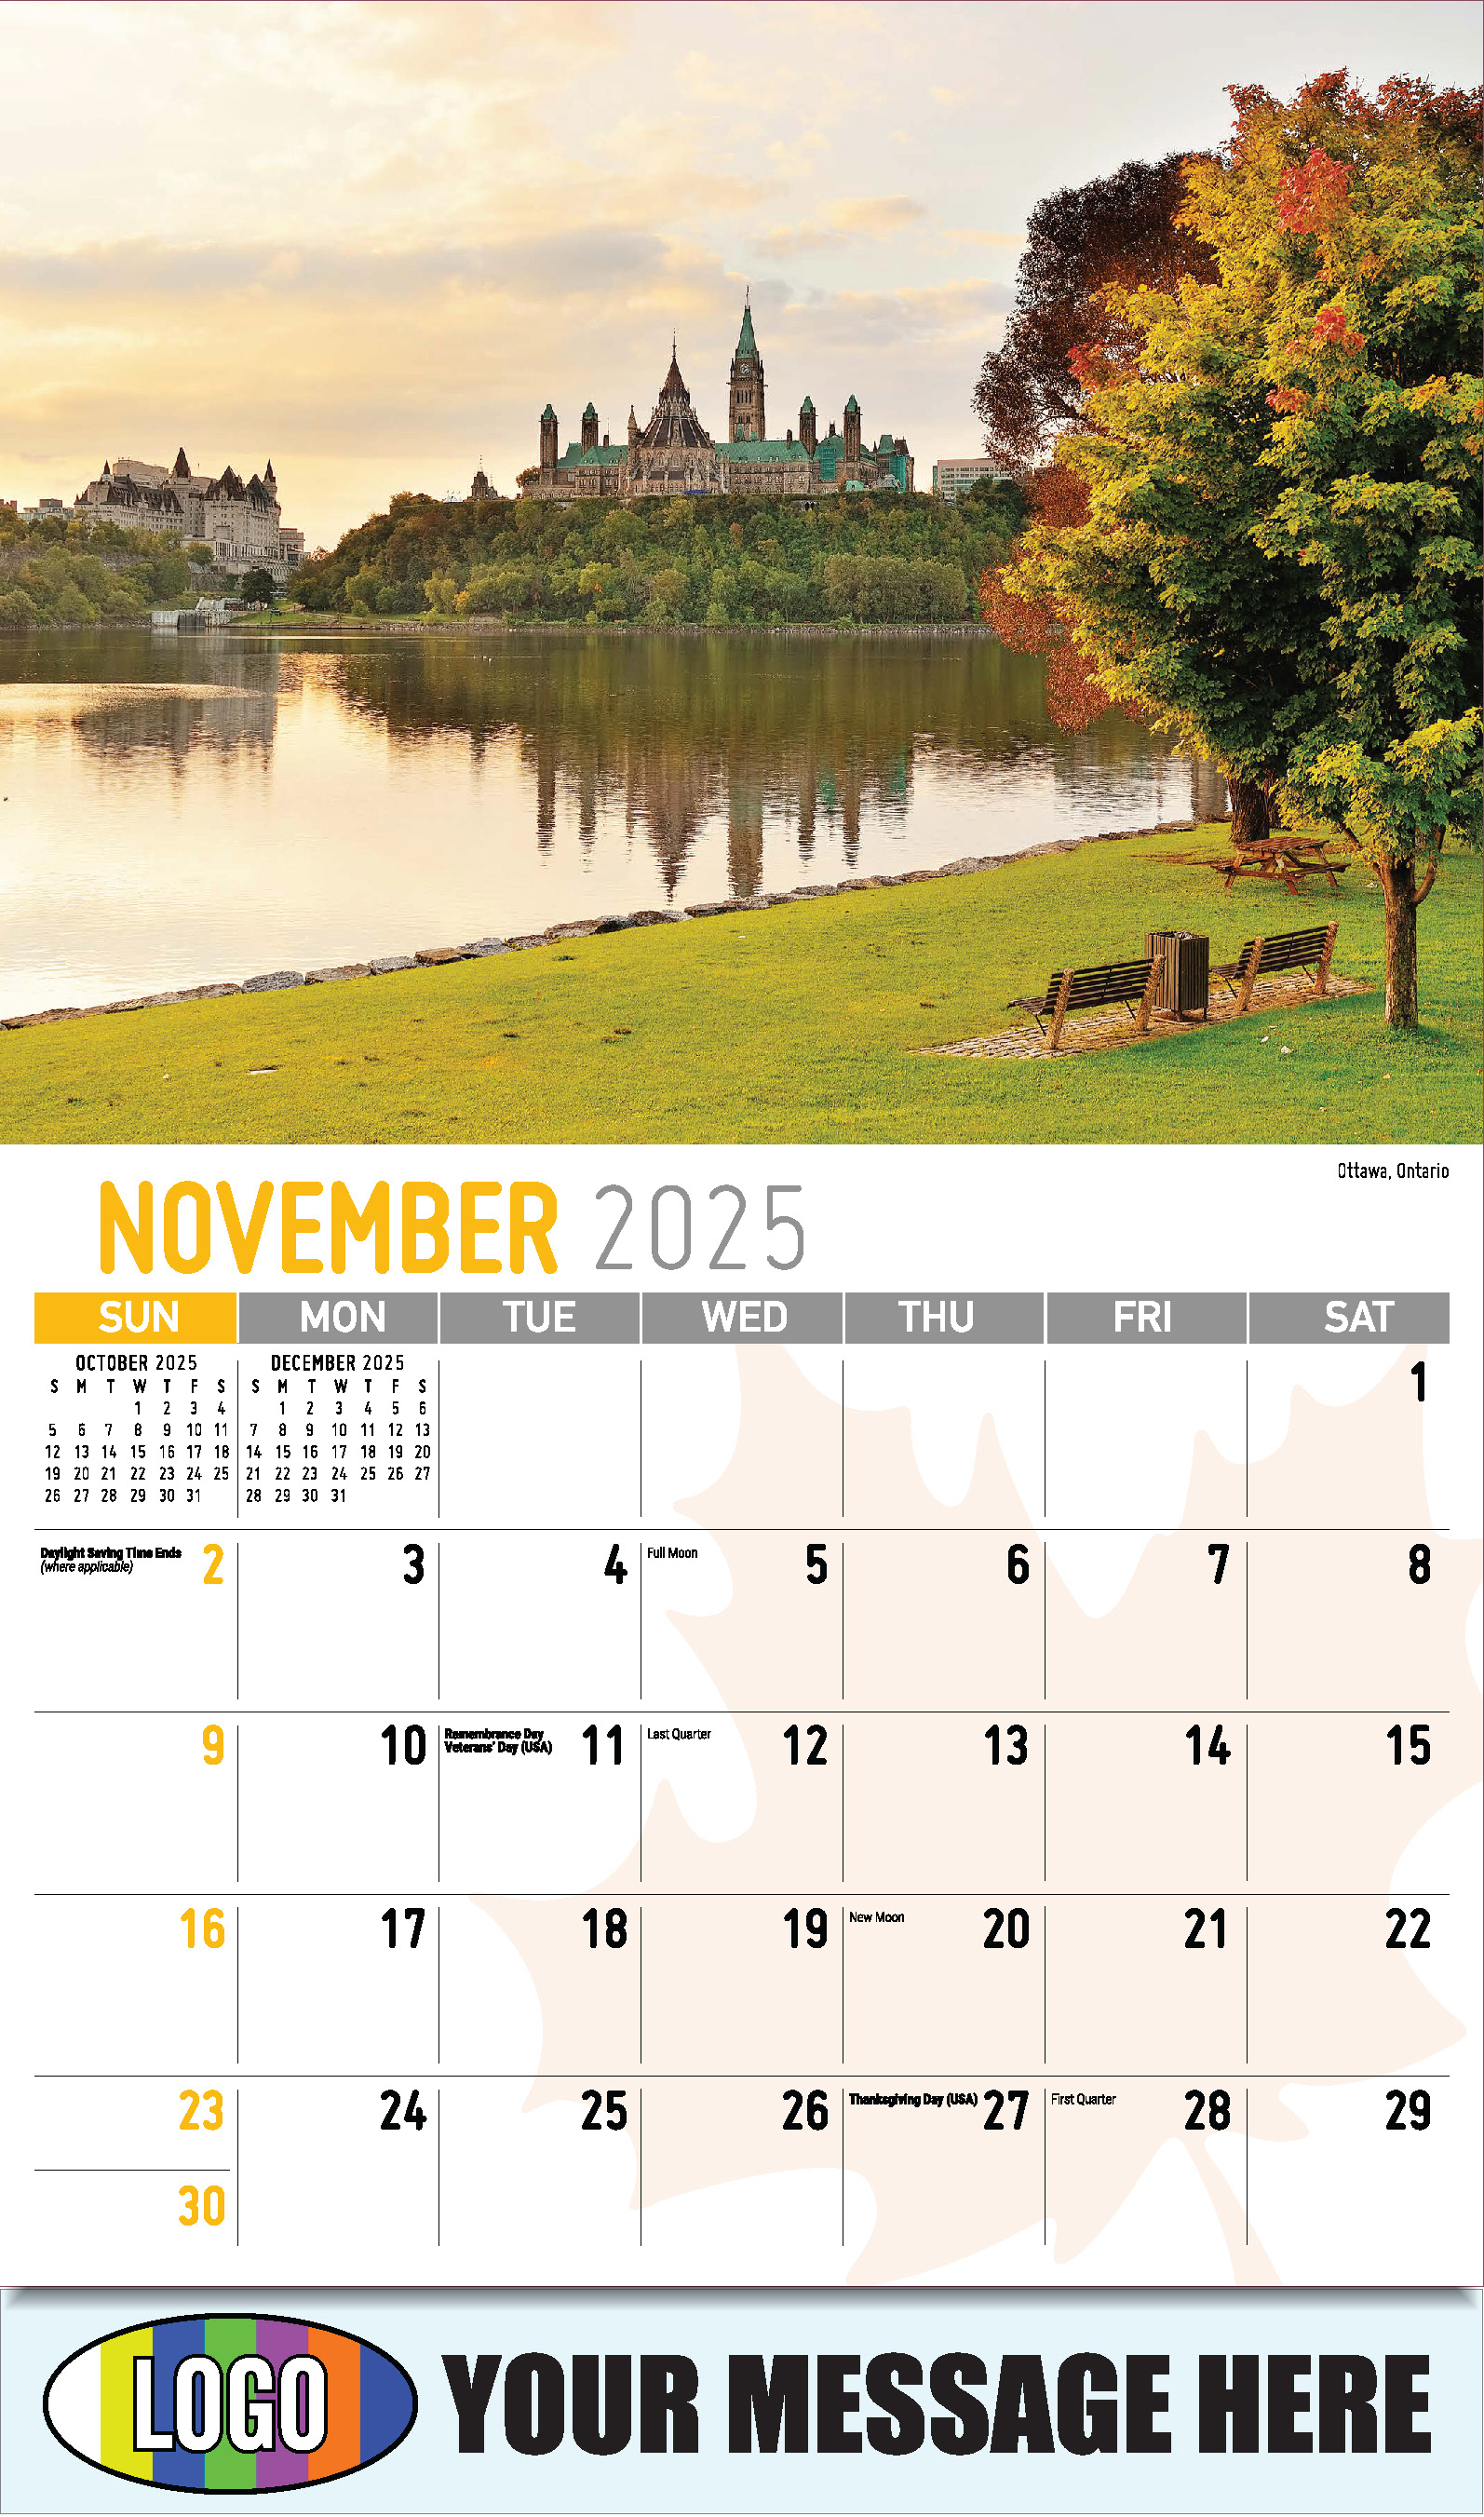 Scenes of Canada 2025 Business Promotion Wall Calendar - November